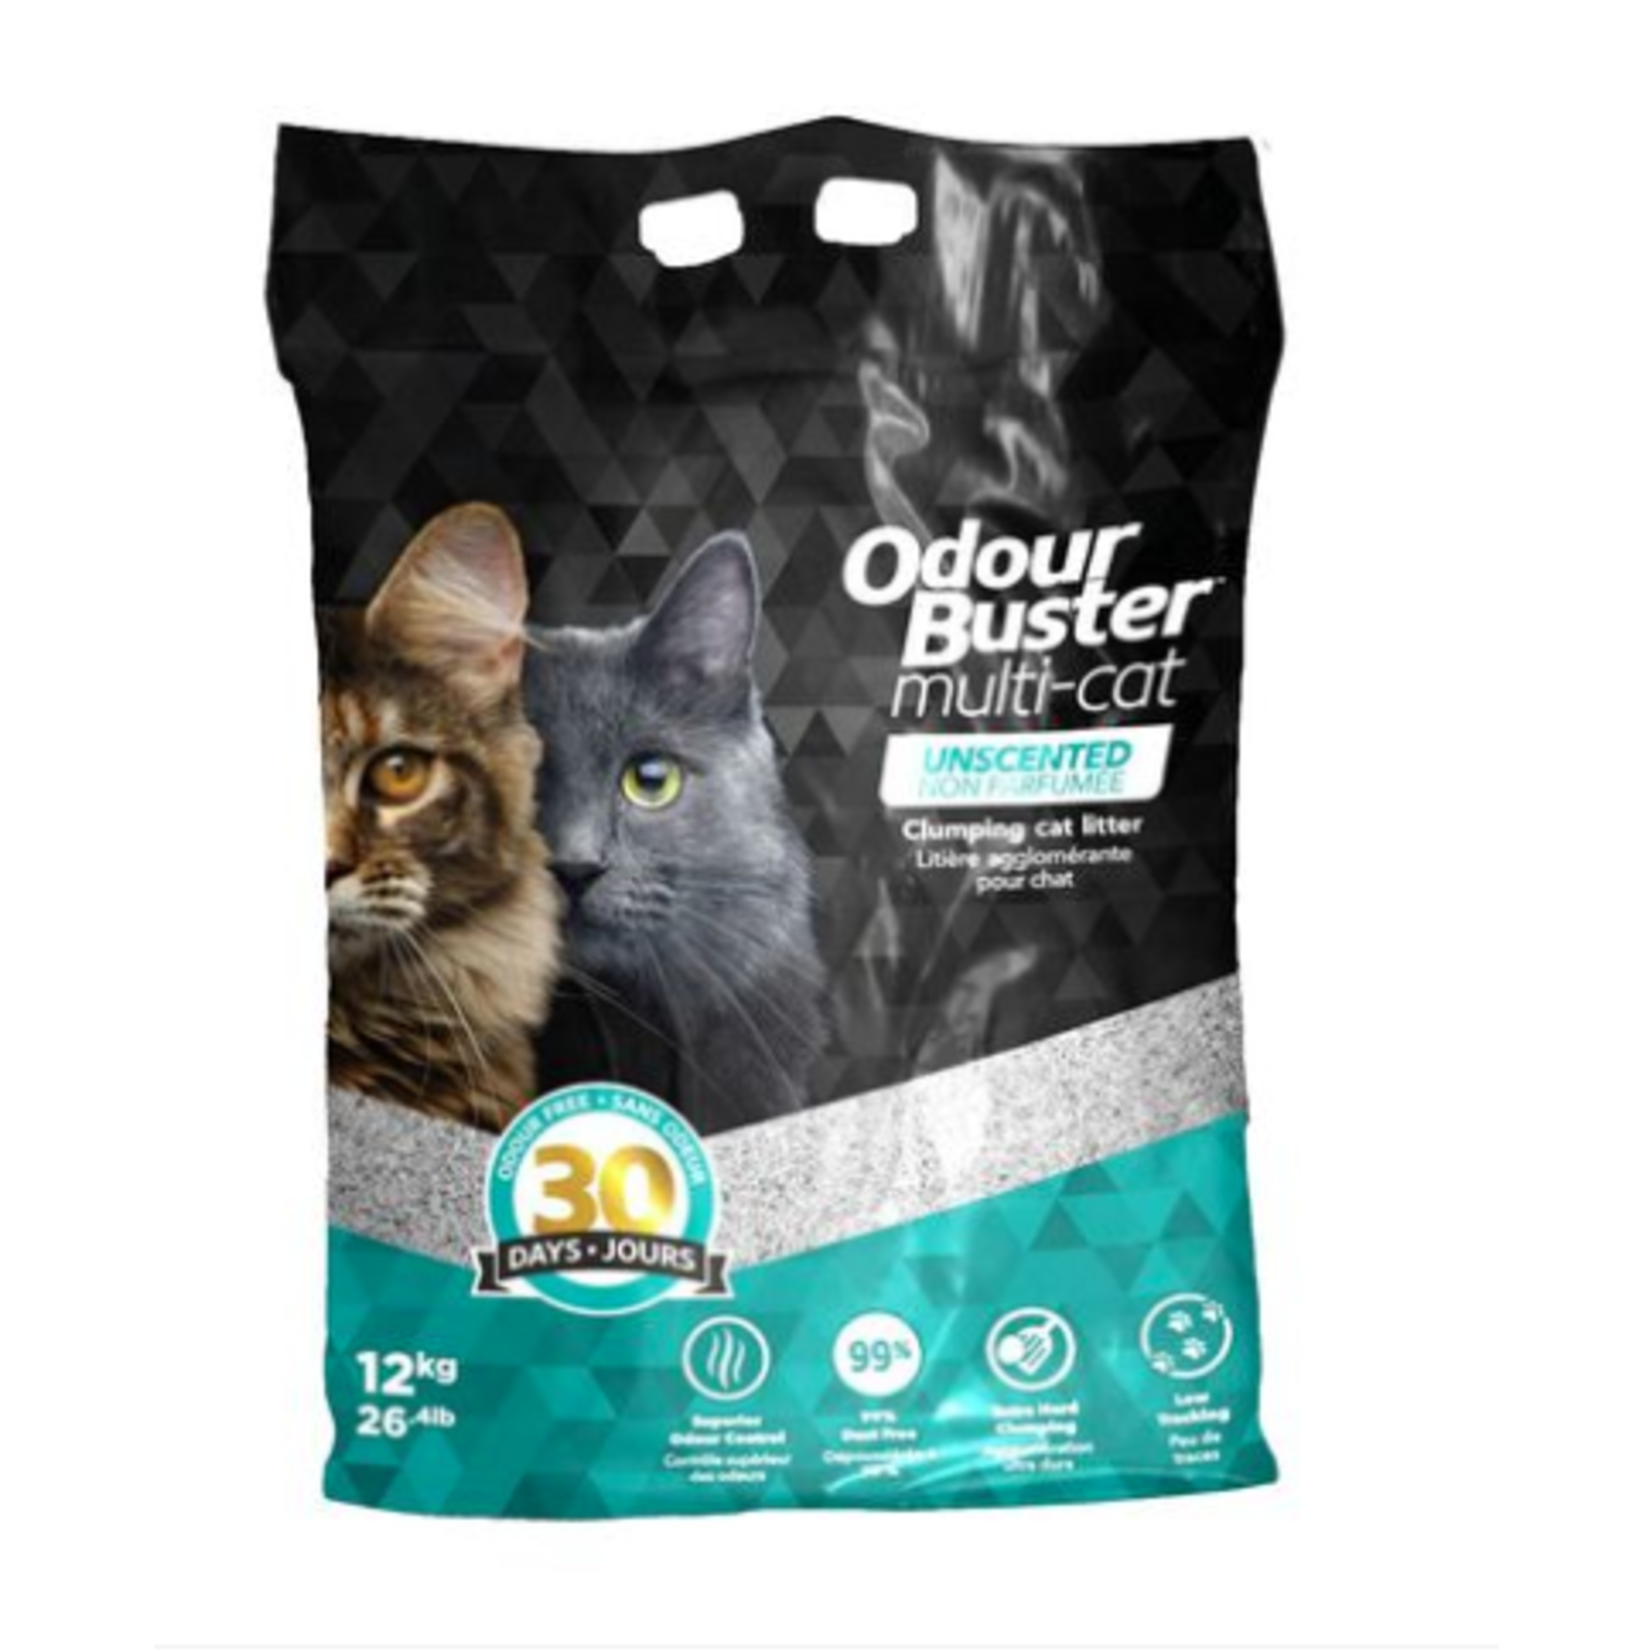 Odour Buster Odourbuster Litière agglomérante multi-chat 12kg